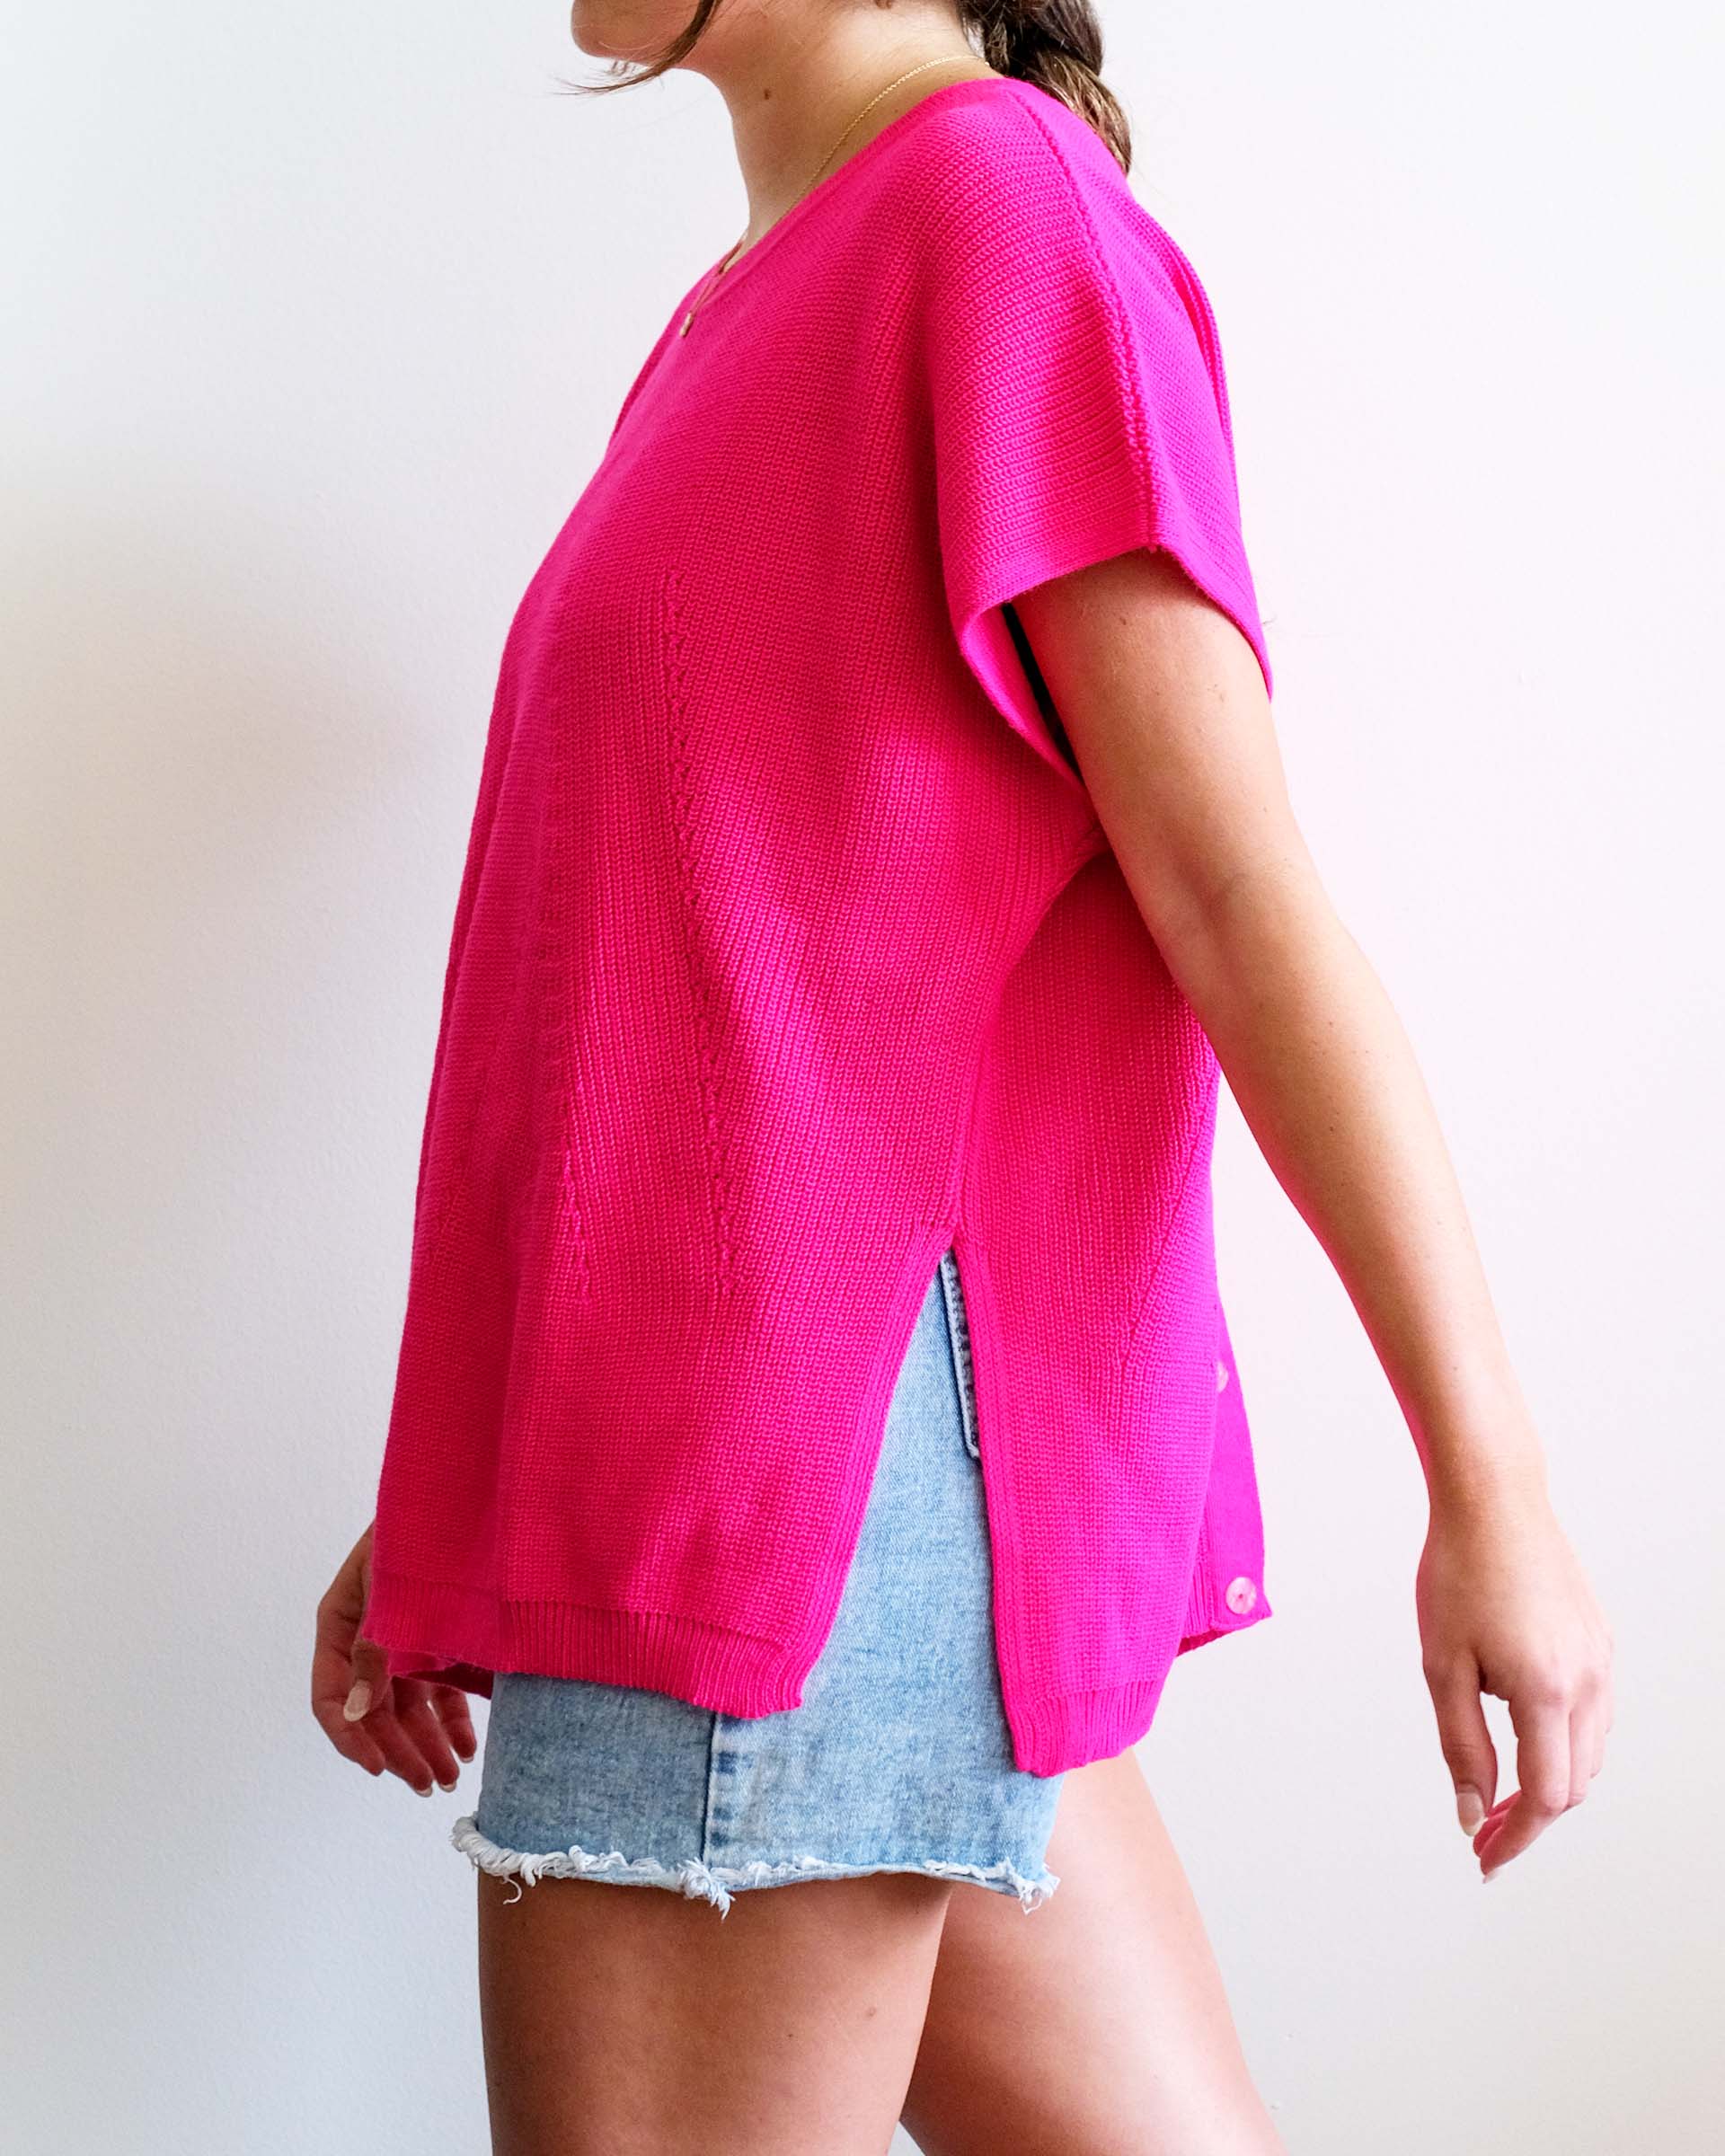 Women's One Size Hot Pink Short Sleeve Sweater With Buttons Down Back Casual Day Outfit